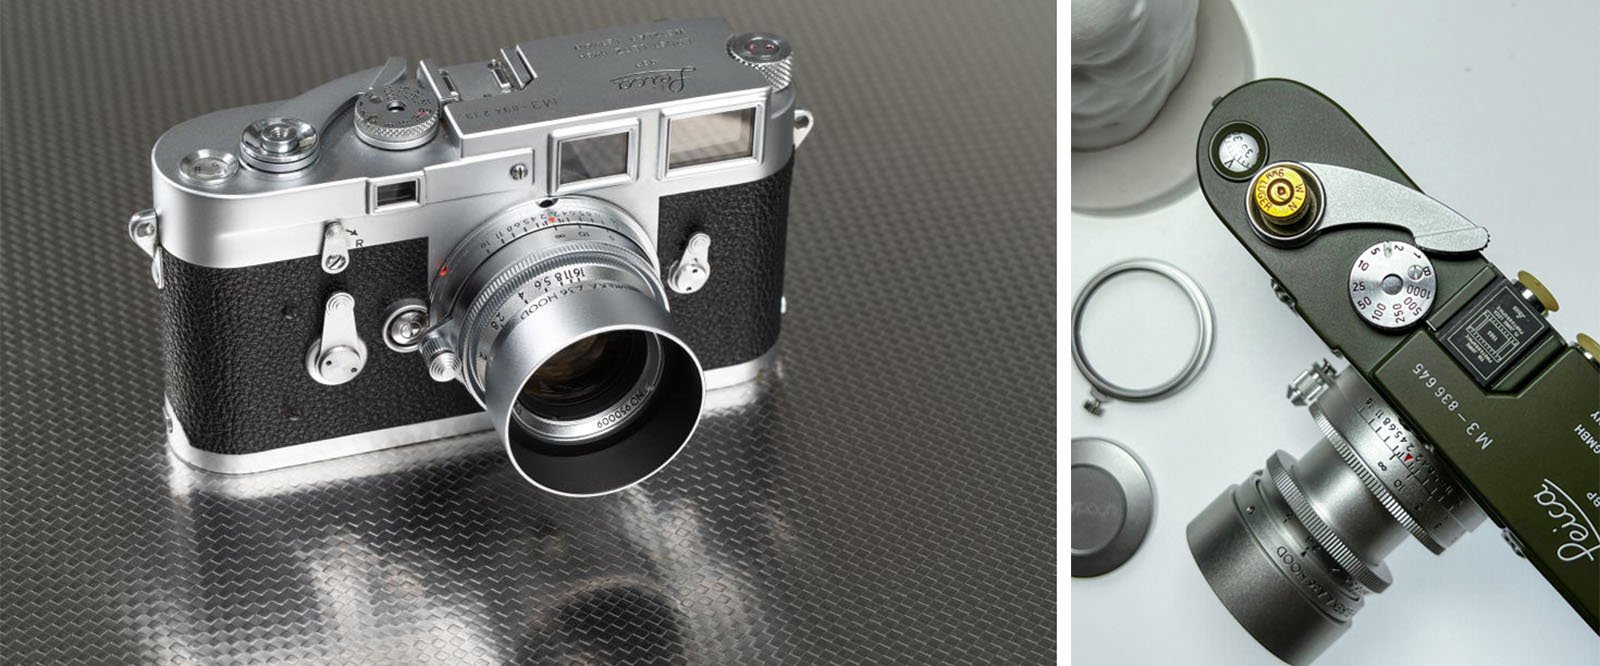 Side-by-side images of Leica cameras. The left image shows a vintage silver Leica camera with a mounted lens on a textured surface. The right image displays an olive green Leica camera from a top-down angle, revealing the lens and camera controls.